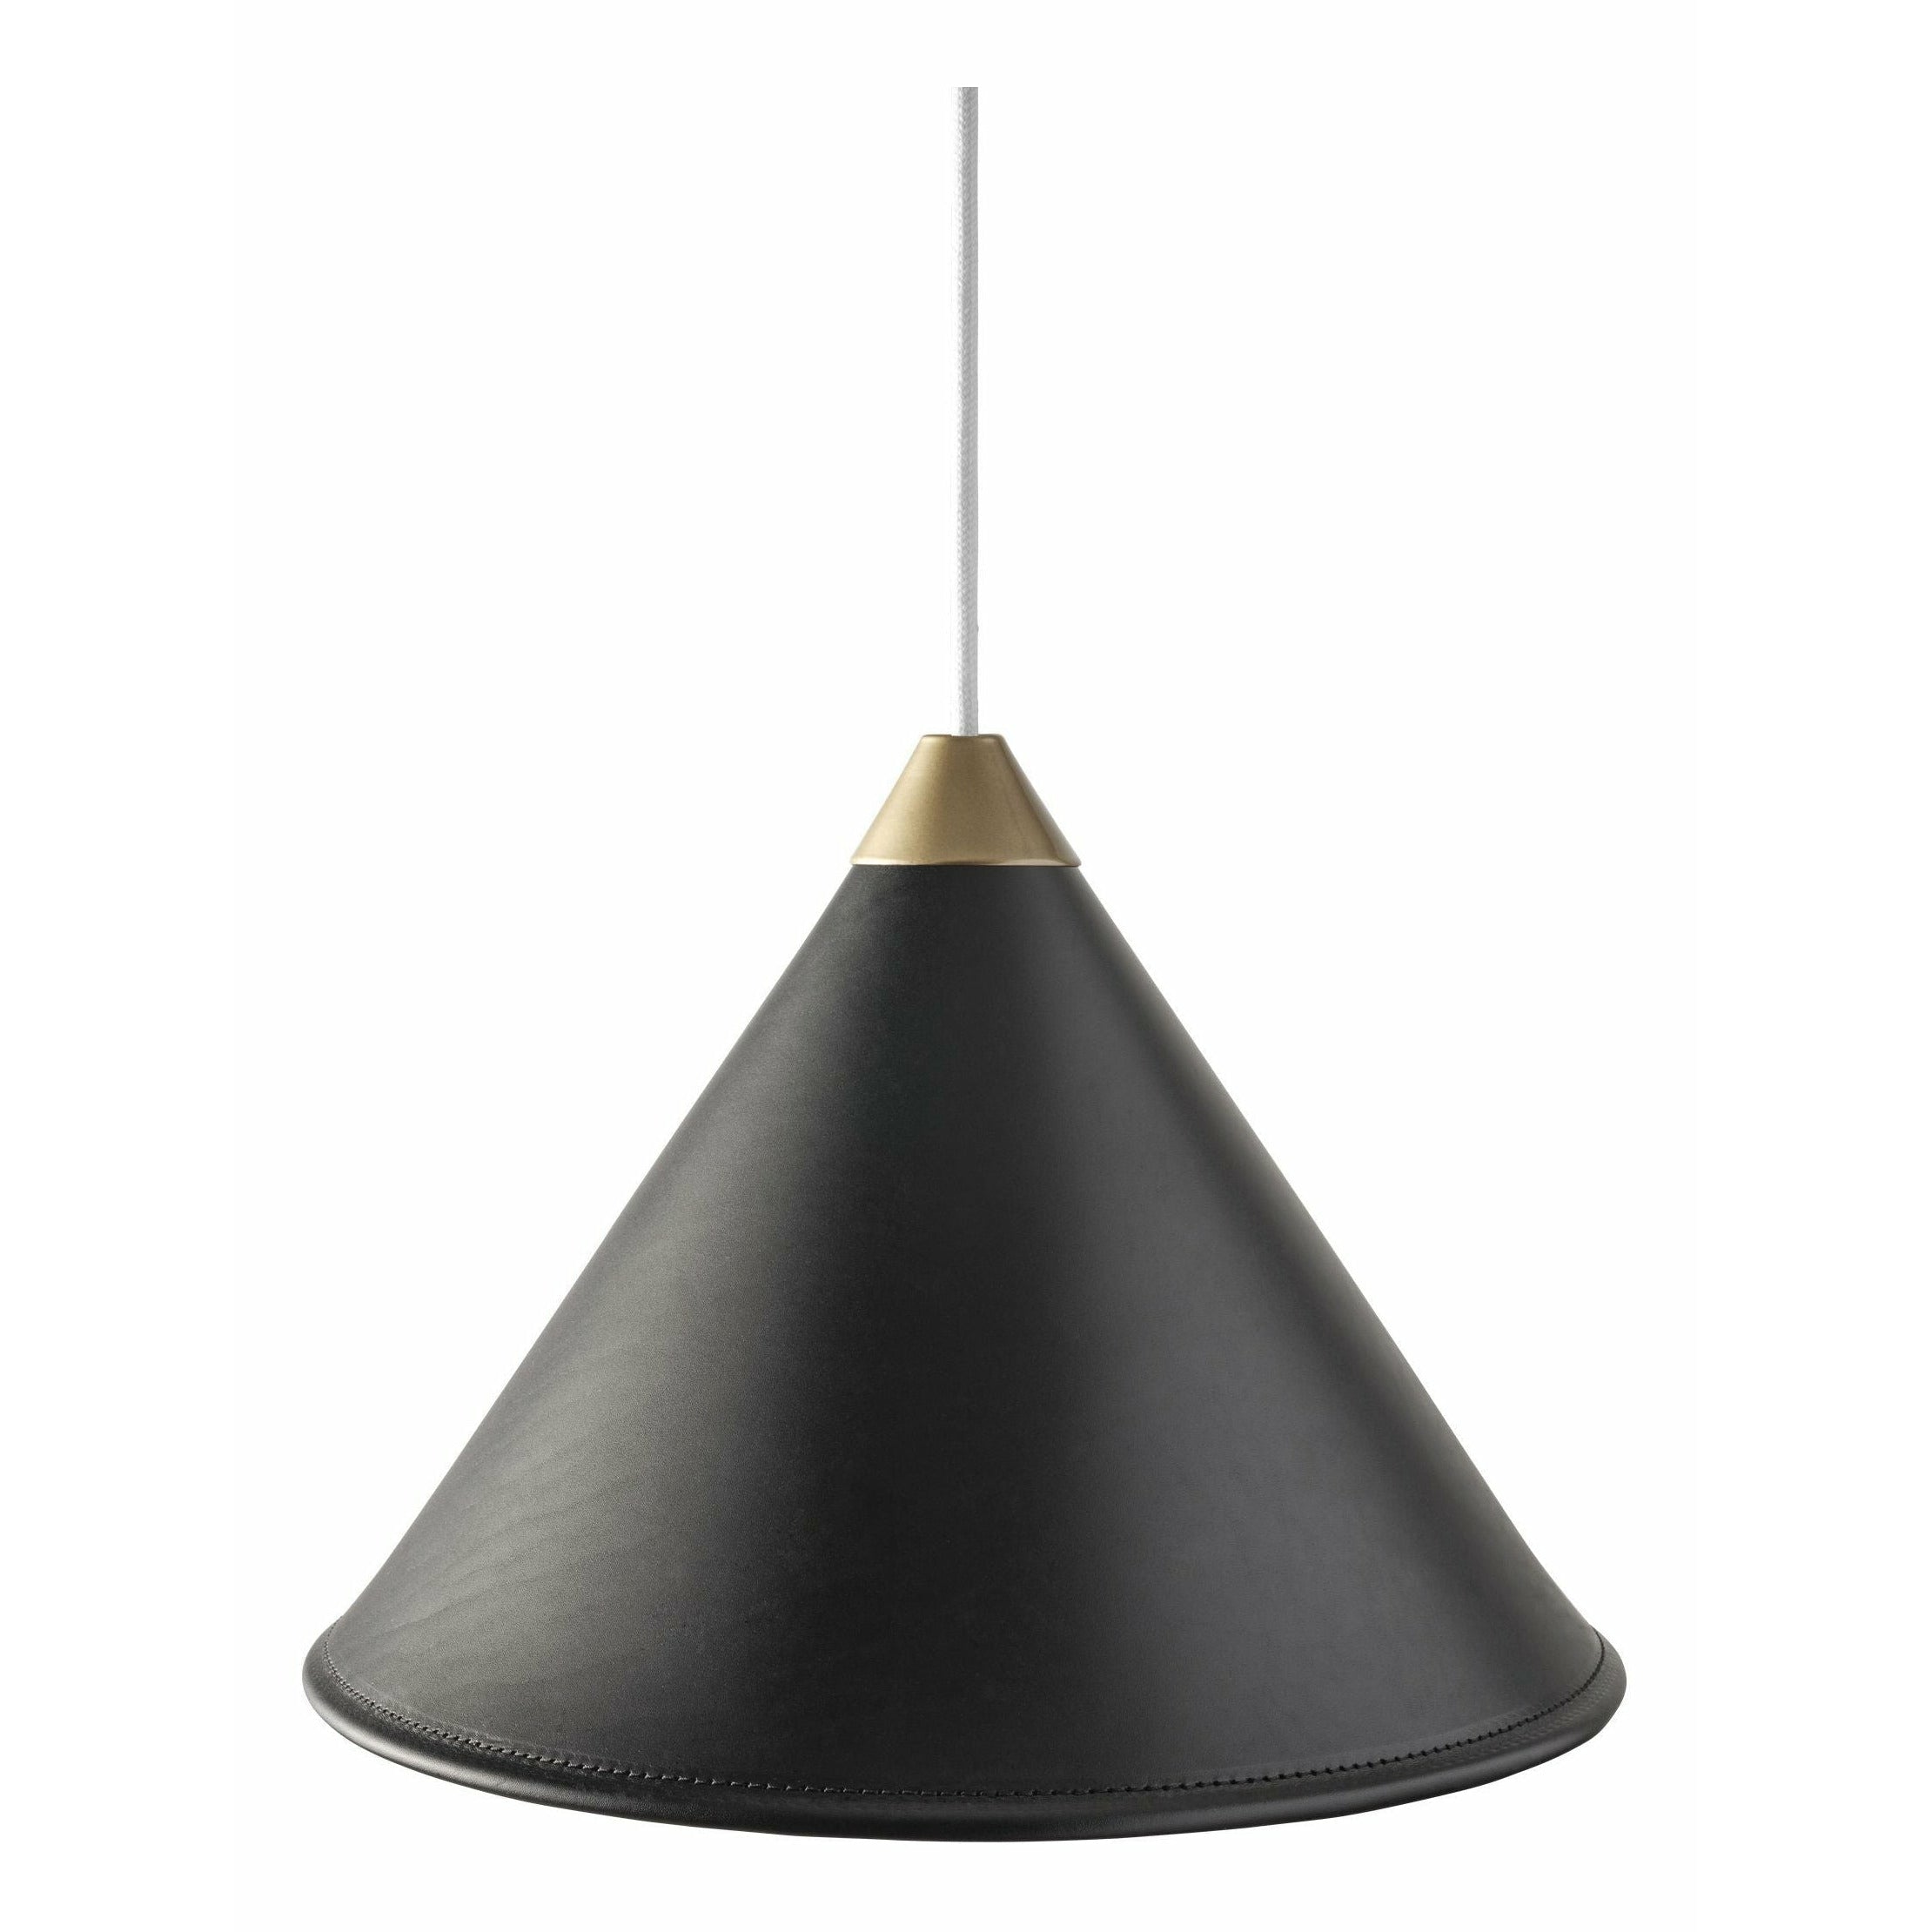 Cuero Namibia Pendant ø 45 Cm, Black/Brass With White Cable